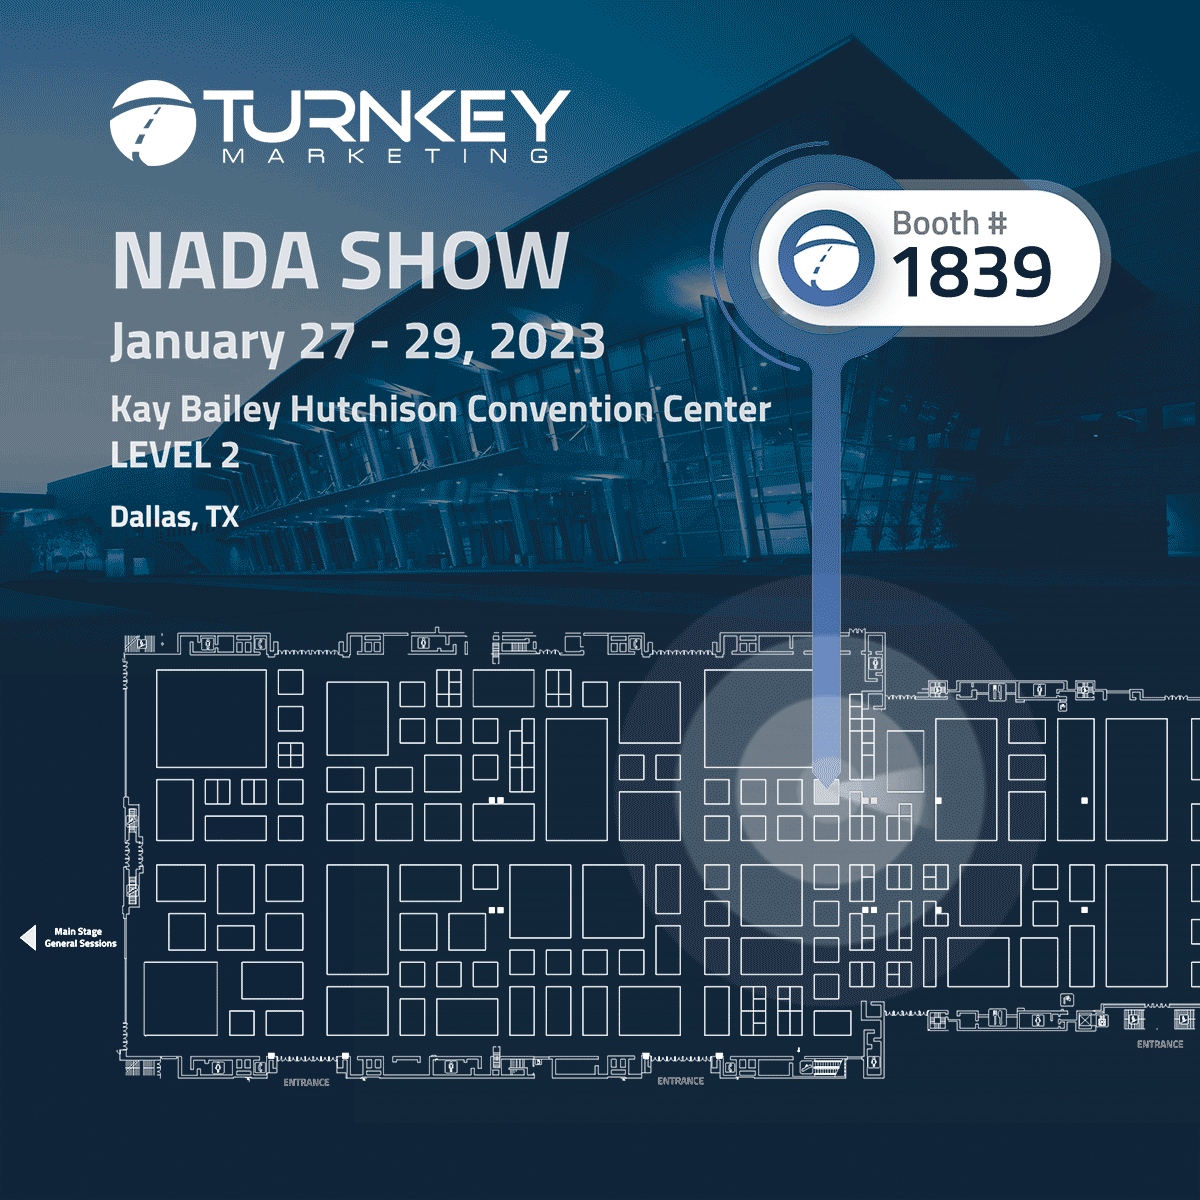 IT'S GO TIME 💥 Let's chat all about the new #Marketing innovations that will make your dealership stand out from the rest! We will be at #NADA2023 booth #1839 to chat all things marketing, product development and GROWTH 🎉 Stop by #Booth1839 🚙 #TkmktStrong #Automotive #NADAShow